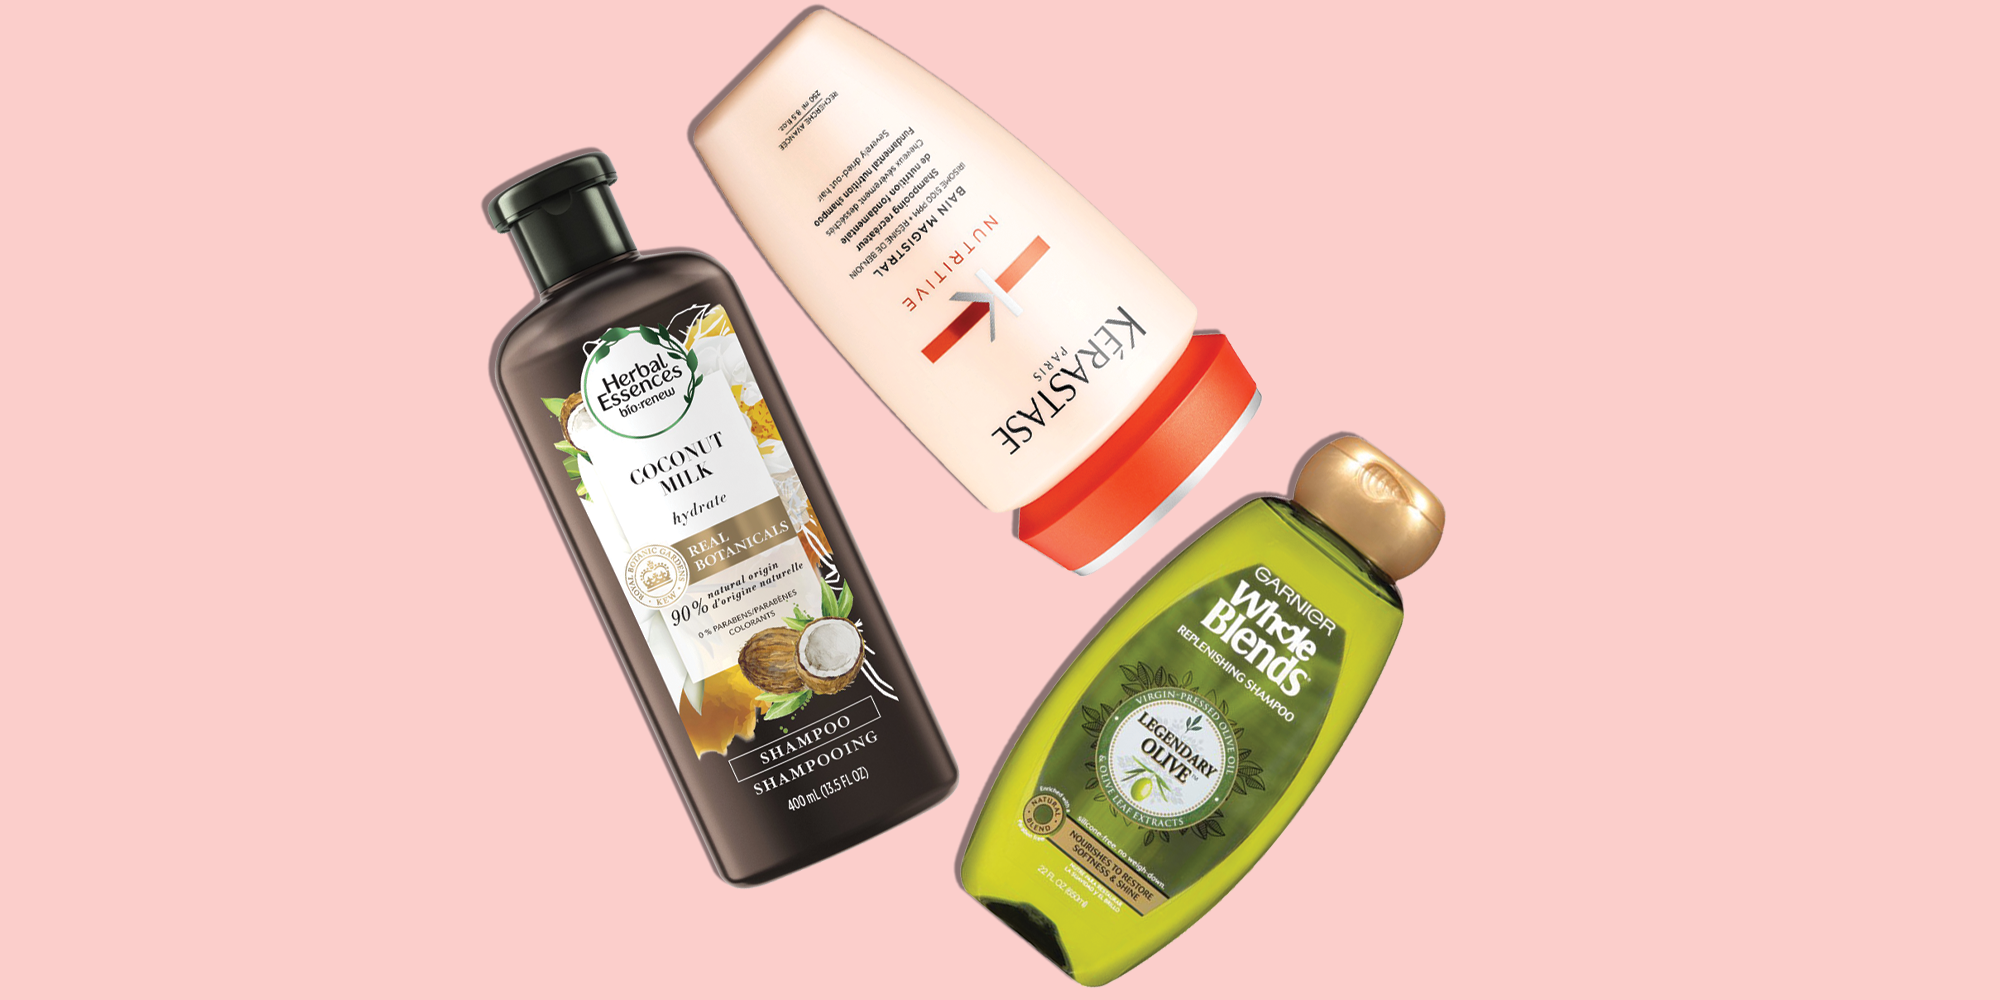 6 Best Ingredients To Look For In Shampoo For Dry And Frizzy Hair